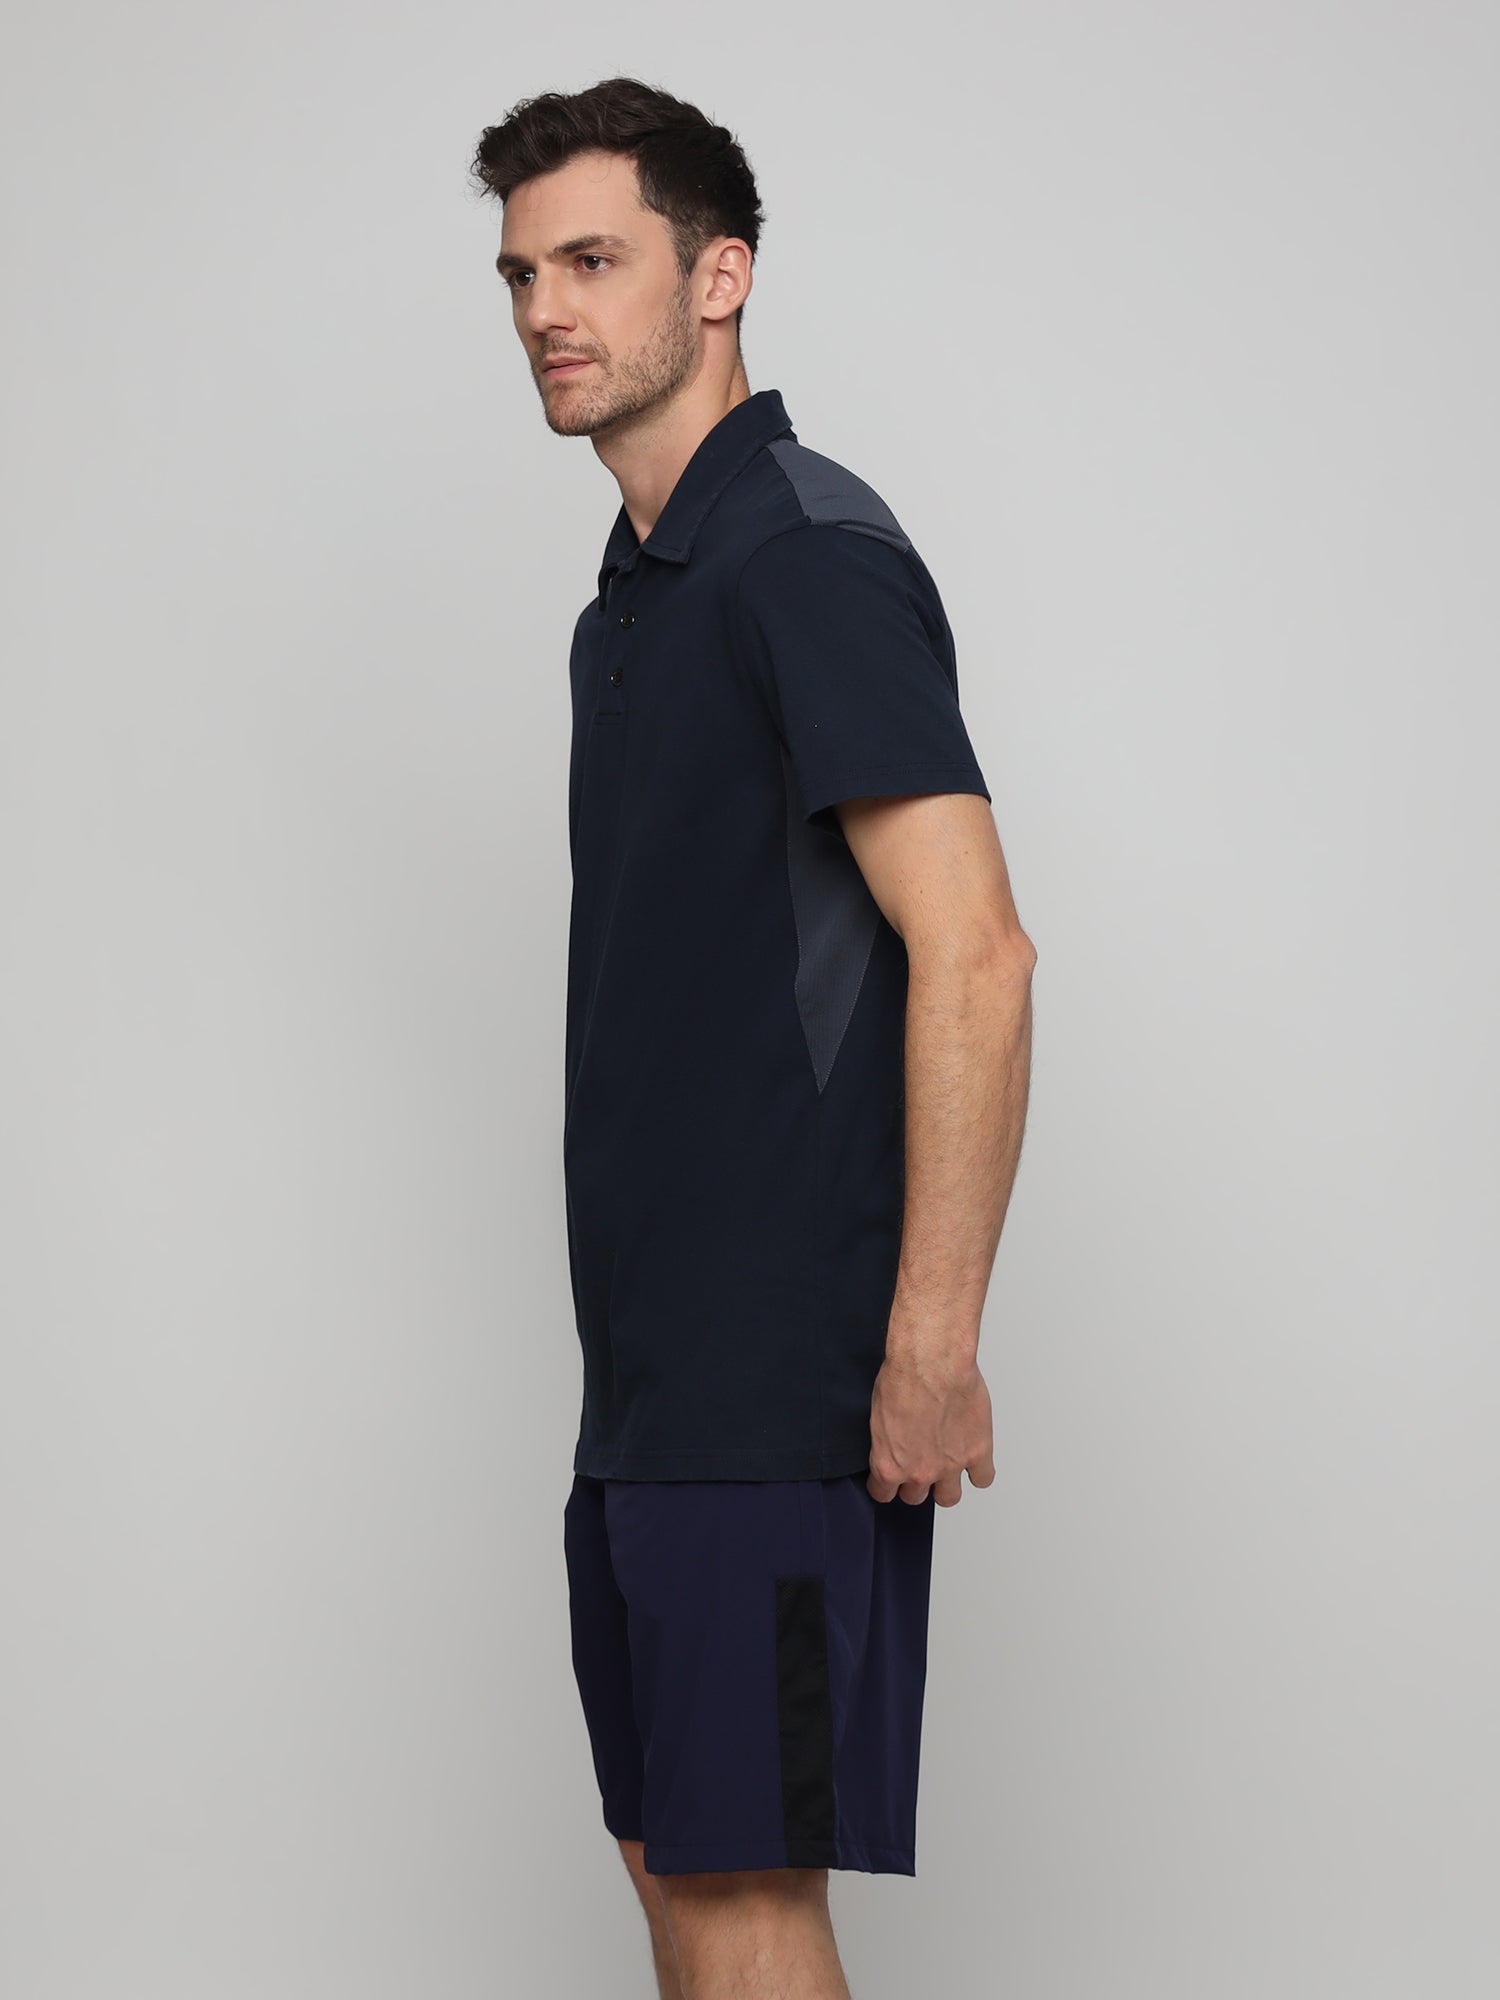 Unisex Everyday Polo Male T-shirt Navy